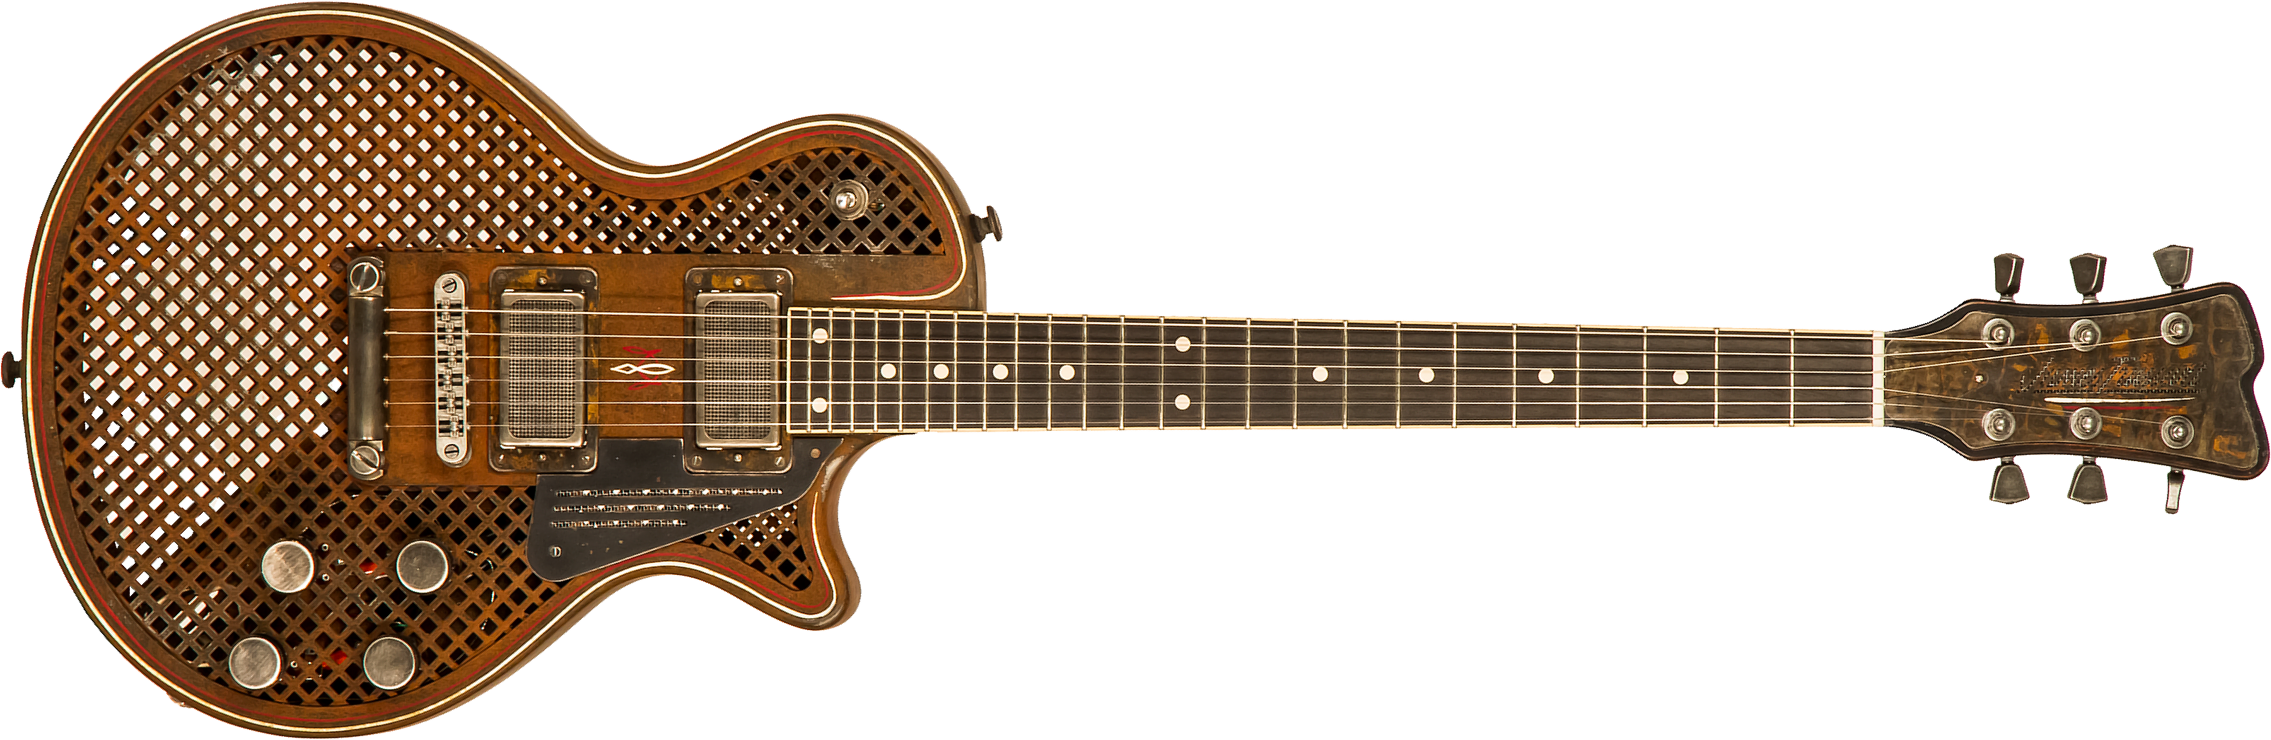 James Trussart Steeldeville Perf.front.back 2h Ht Eb #21179 - Rust O Matic Pinstriped Caged - Single-Cut-E-Gitarre - Main picture